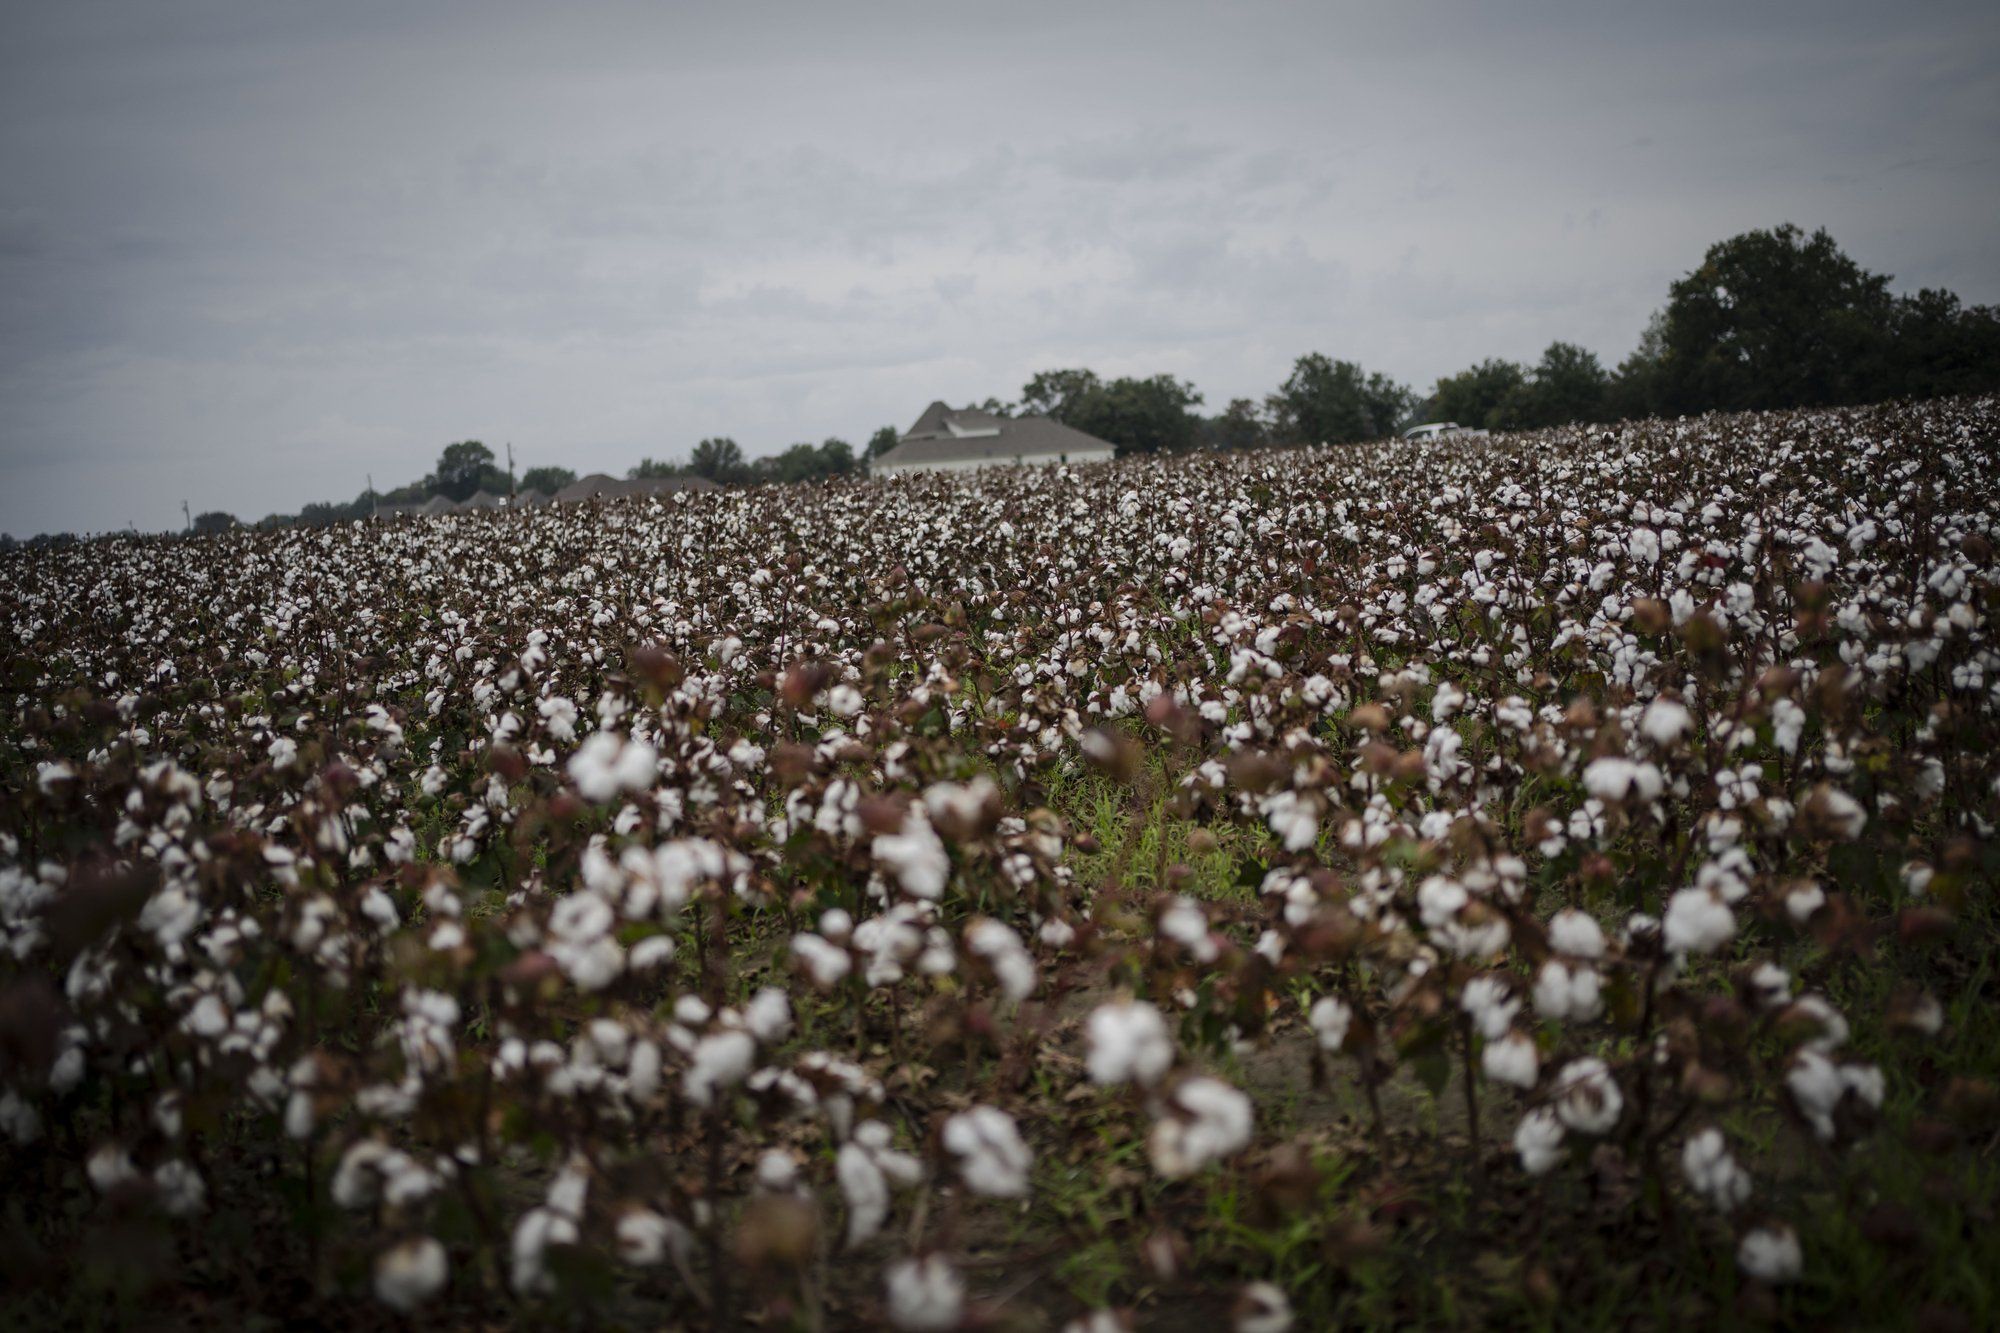 A house is dwarfed against a cotton field in Yazoo City, Miss. Image by Wong Maye-E / The Associated Press. United States, 2020.